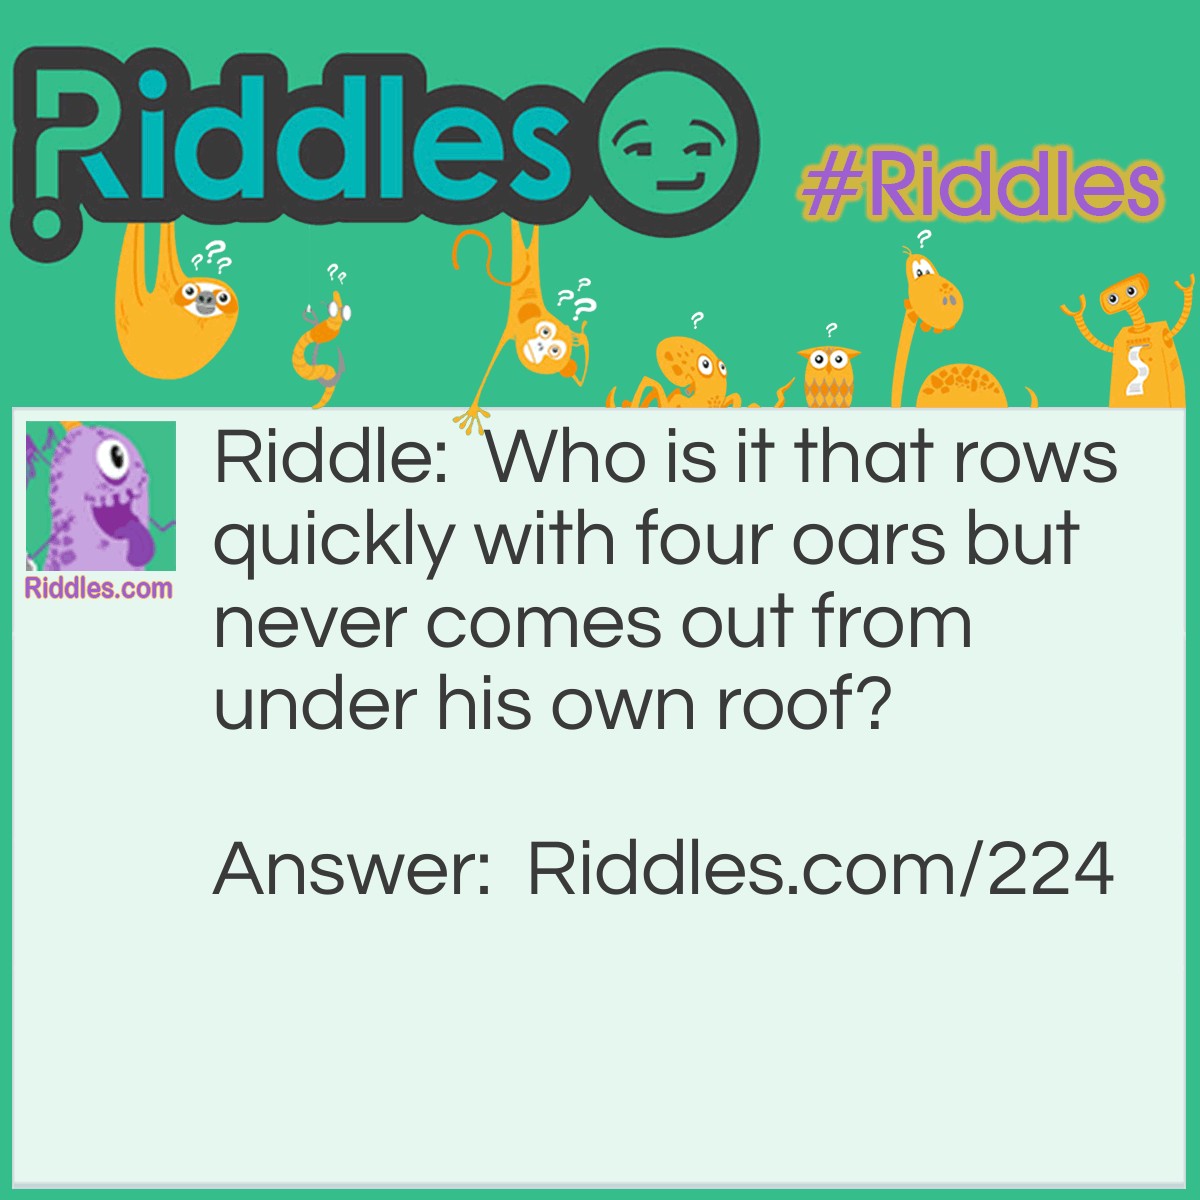 Riddle: Who is it that rows quickly with four oars but never comes out from under his own roof? Answer: A Turtle.